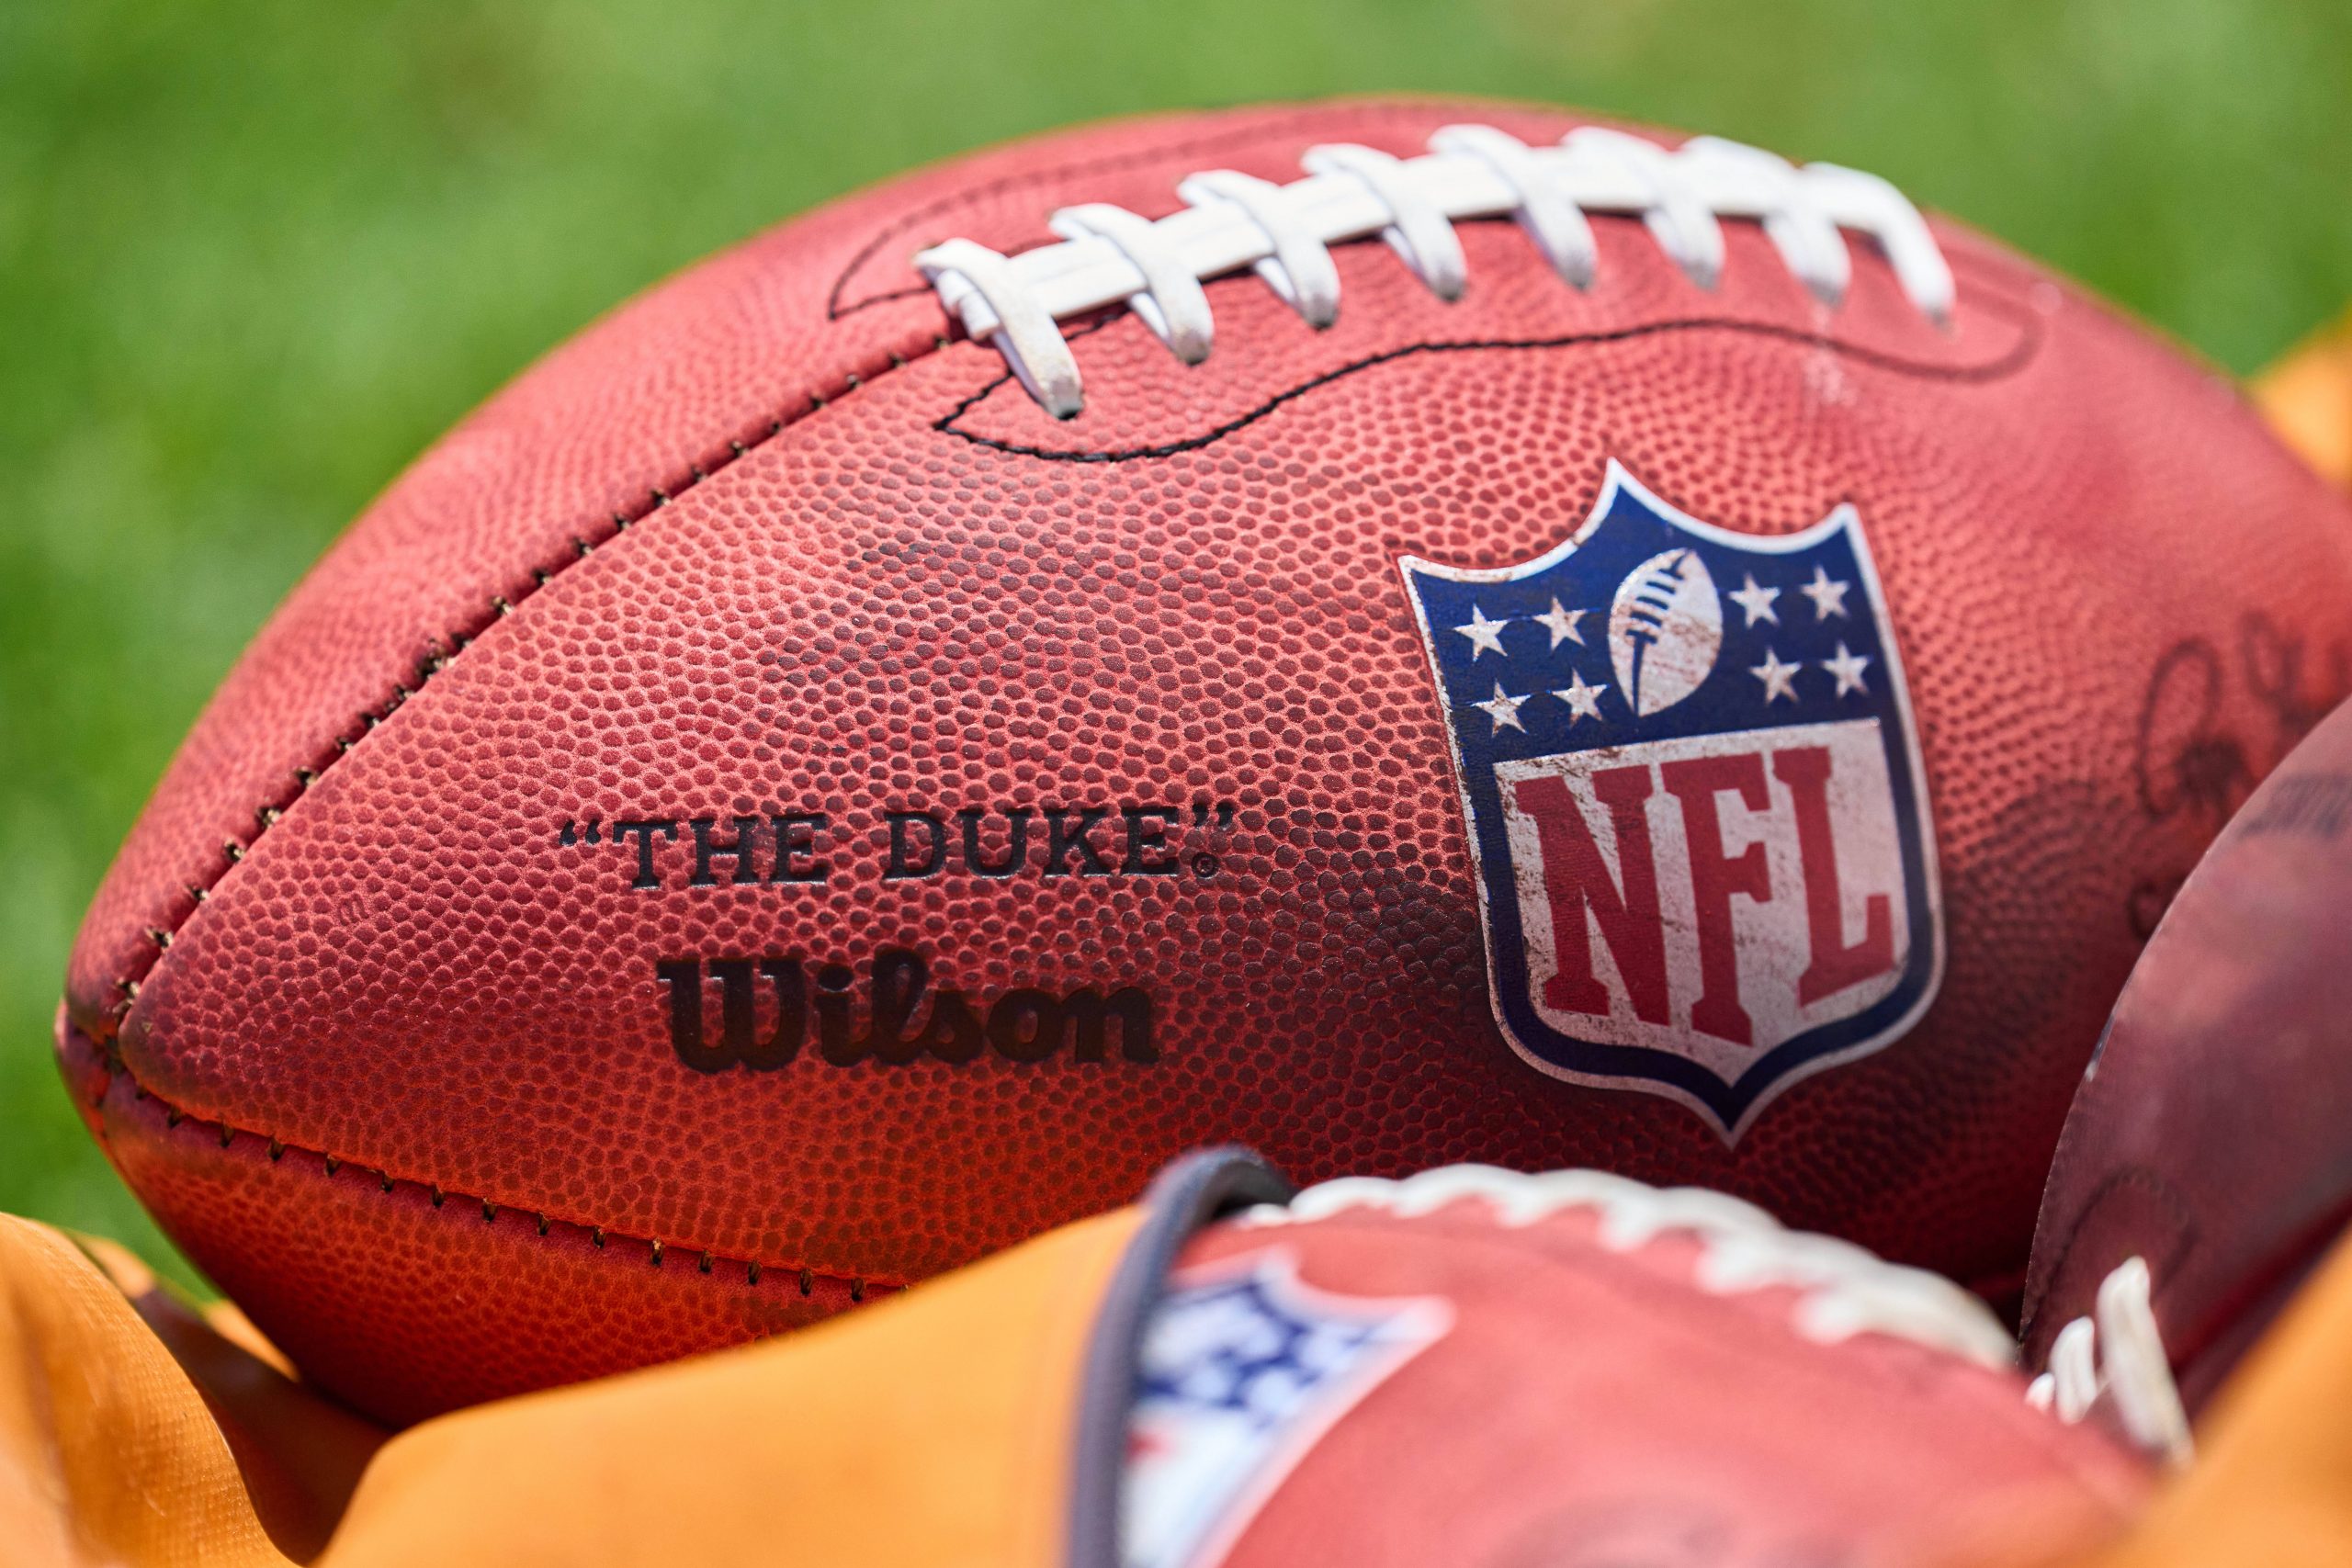 LAKE FOREST, IL - JUNE 14: A detail view of the NFL, American Football Herren, USA logo crest is seen on a Wilson football during the the Chicago Bears Minicamp on June 14, 2022 at Halas Hall in Lake Forest, IL. Photo by Robin Alam/Icon Sportswire NFL: JUN 14 Chicago Bears Minicamp Icon164220614033